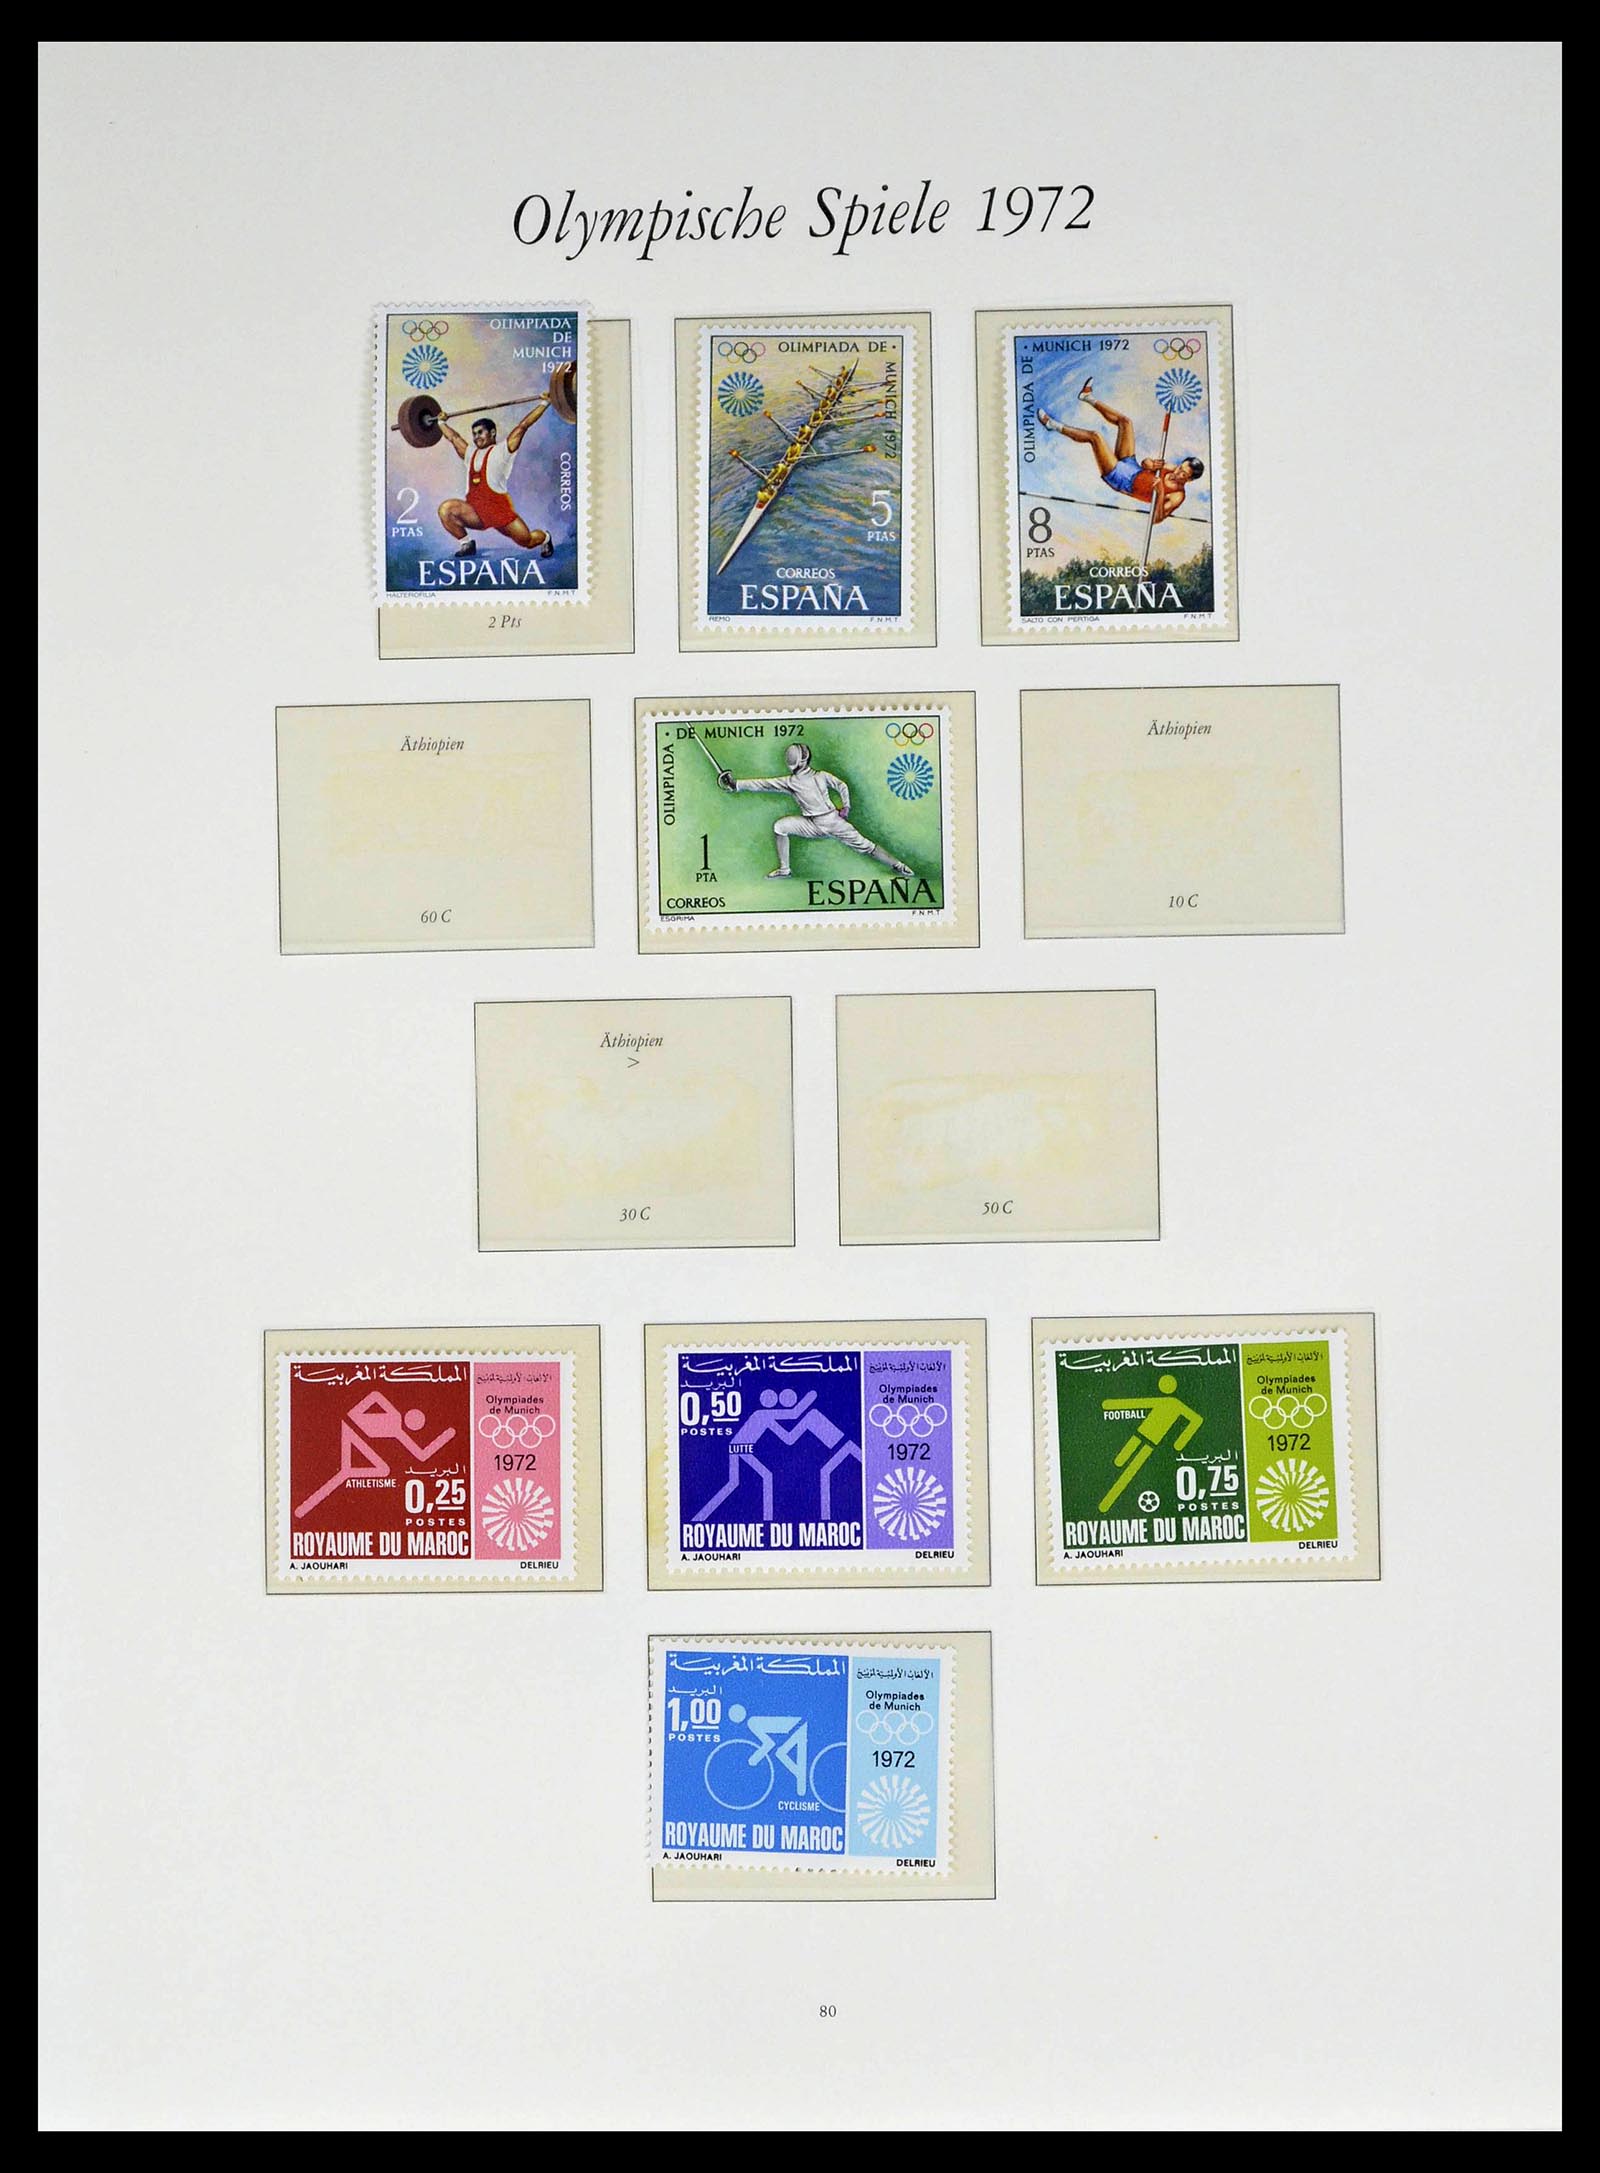 39237 0024 - Stamp collection 39237 Olympics 1972.